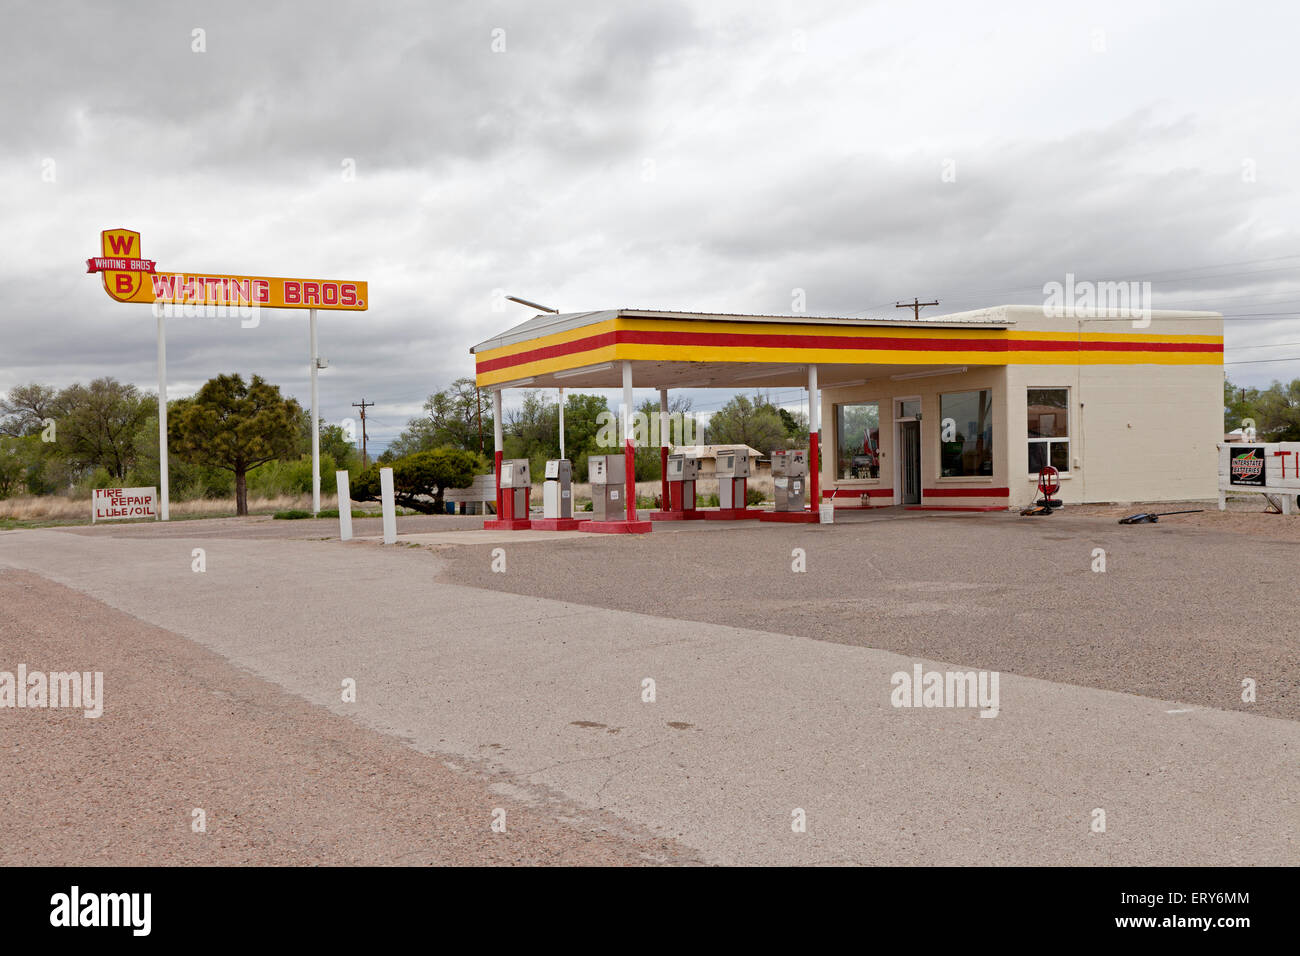 Wittling Bros Tankstelle in Moriarty, New Mexico. Stockfoto